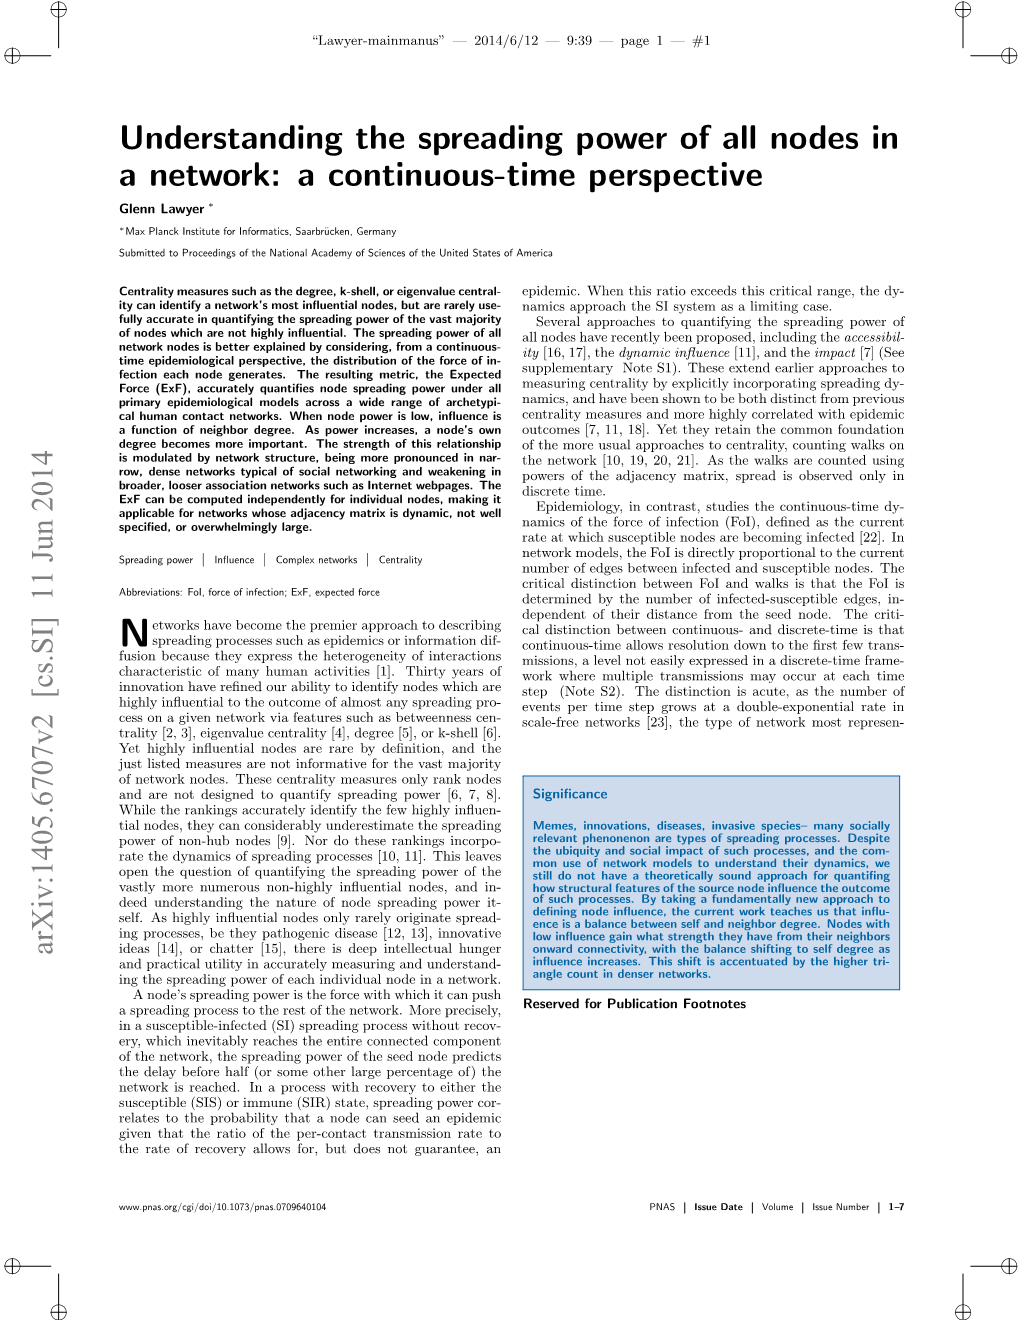 Understanding the Spreading Power of All Nodes in a Network: a Continuous-Time Perspective